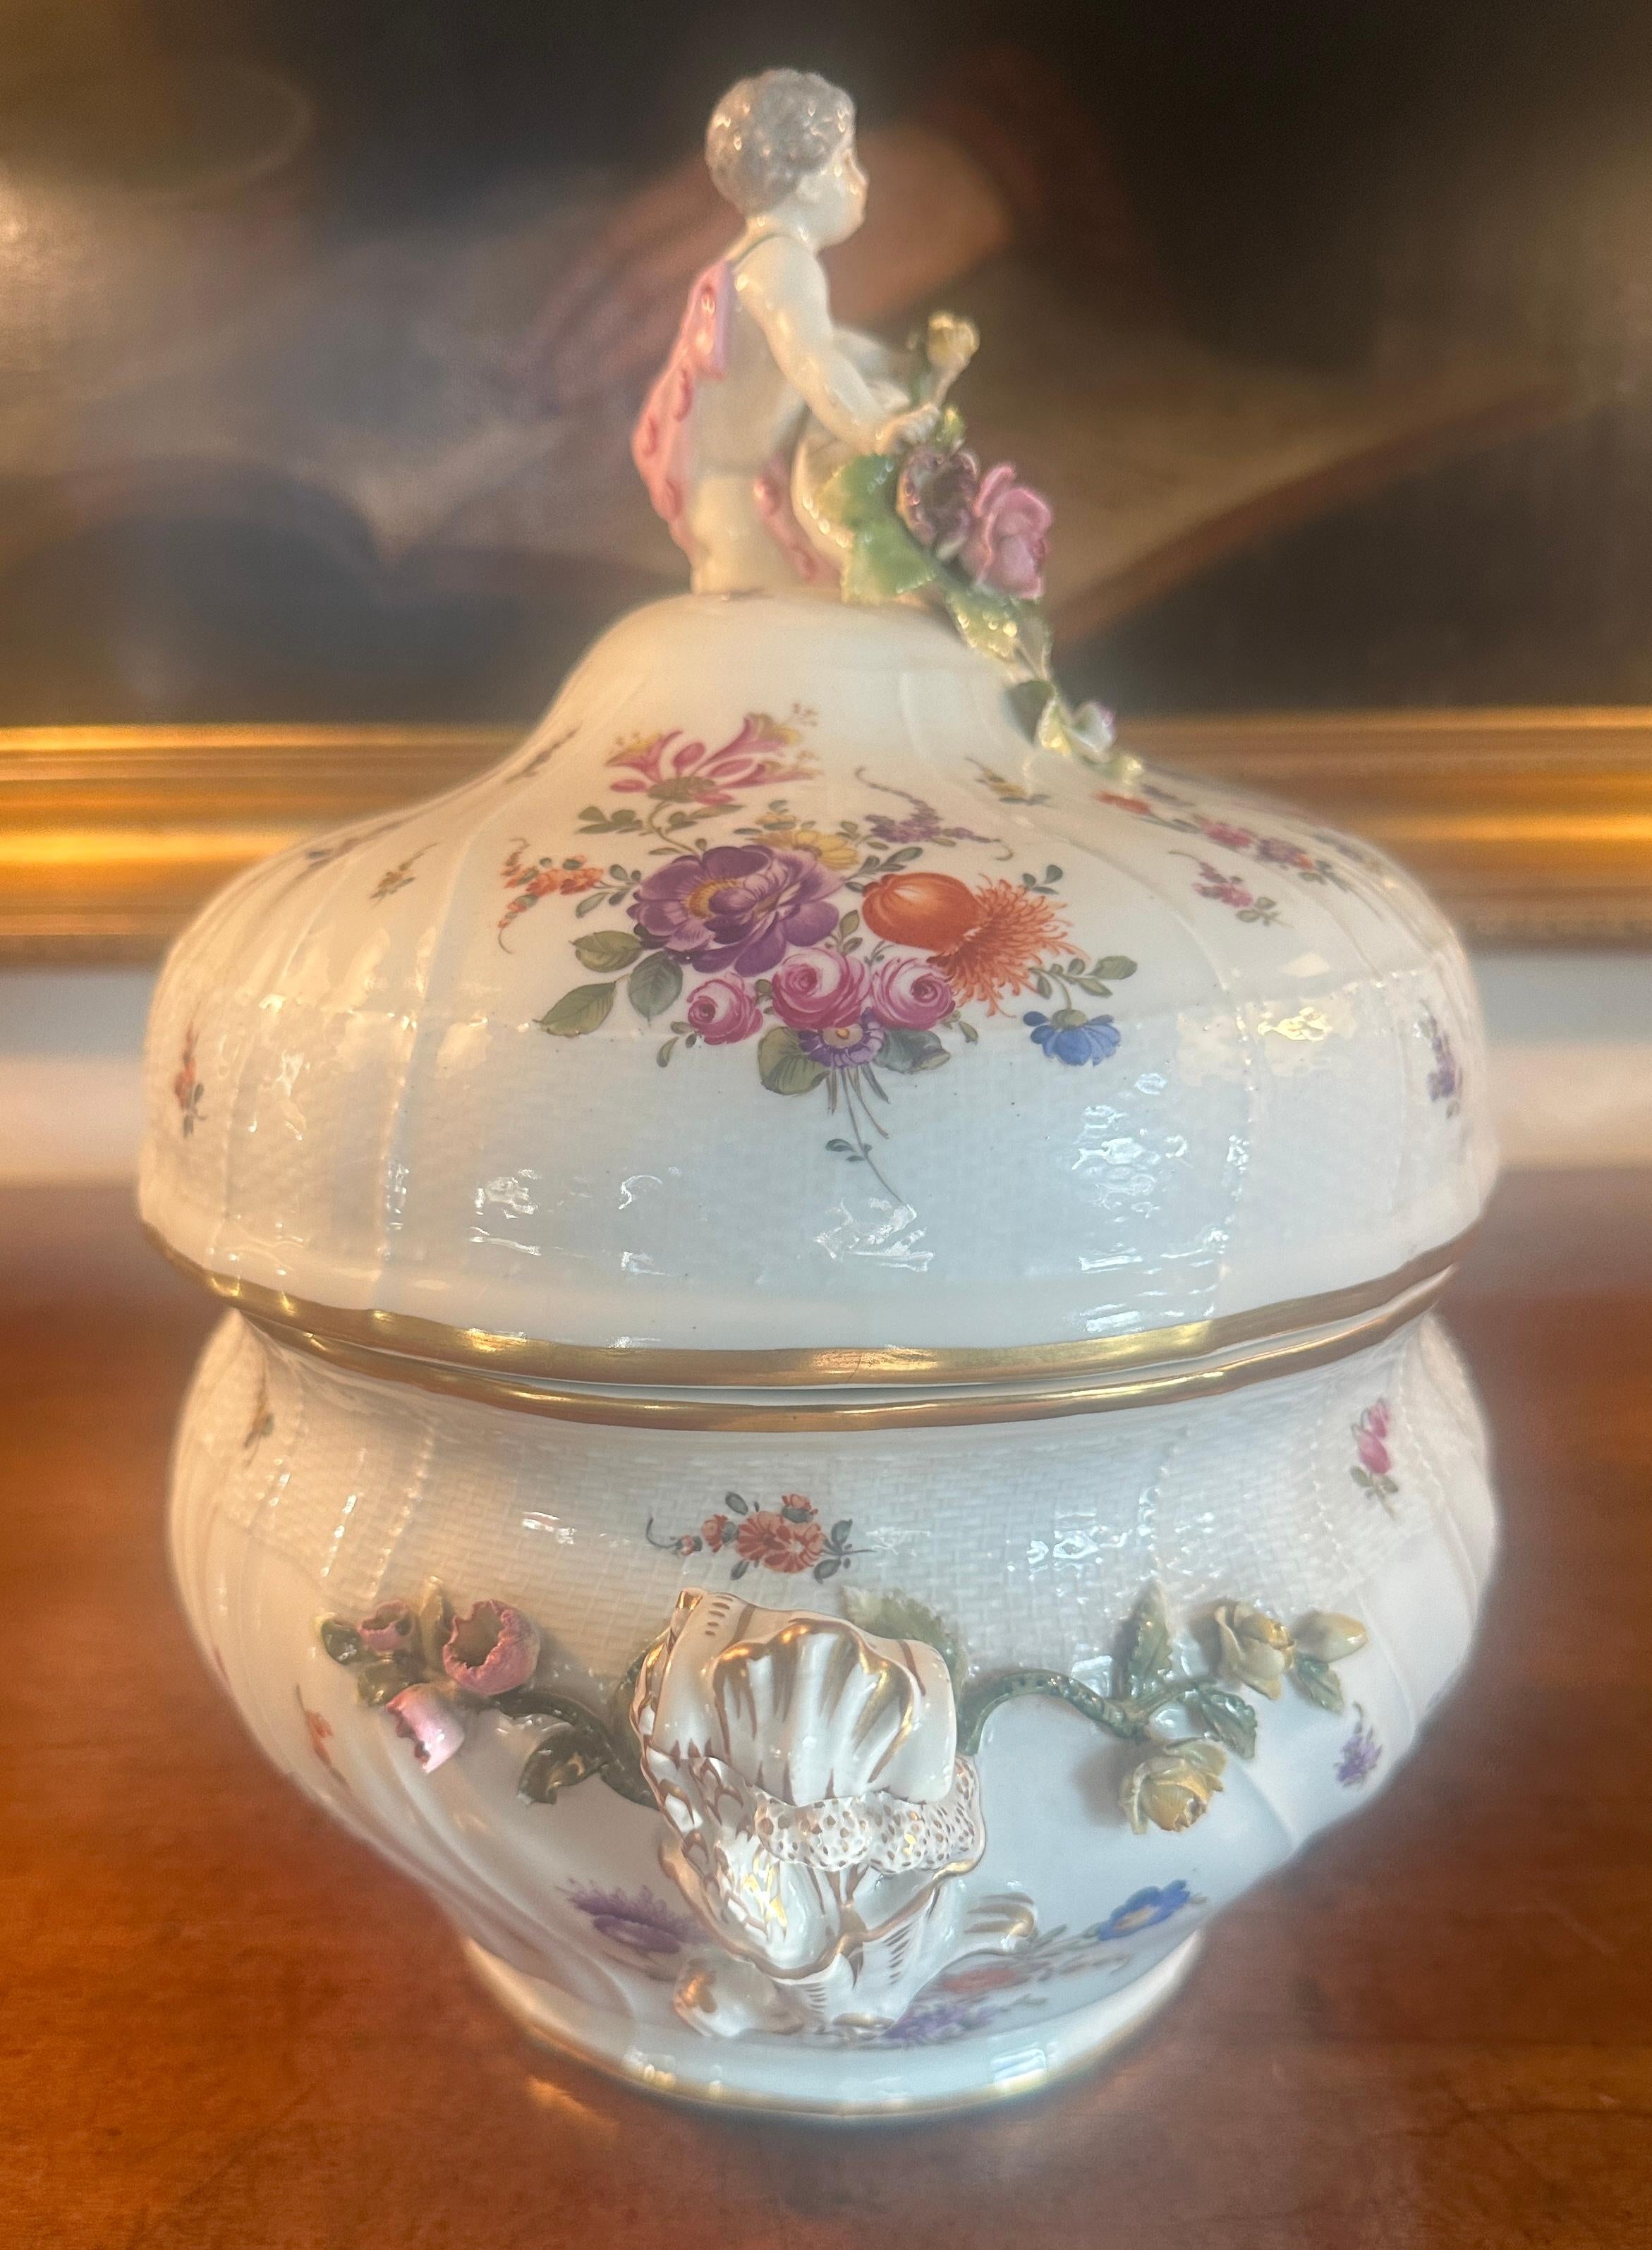 The Konigliche Porcelain Manufactur of the 18th Century was finaced by
Friedrich II. The fabrication of porcelain was stricktly controlled as far
as productivity as well as quality was concerned. No child labor was allowed,
and no inexpensive